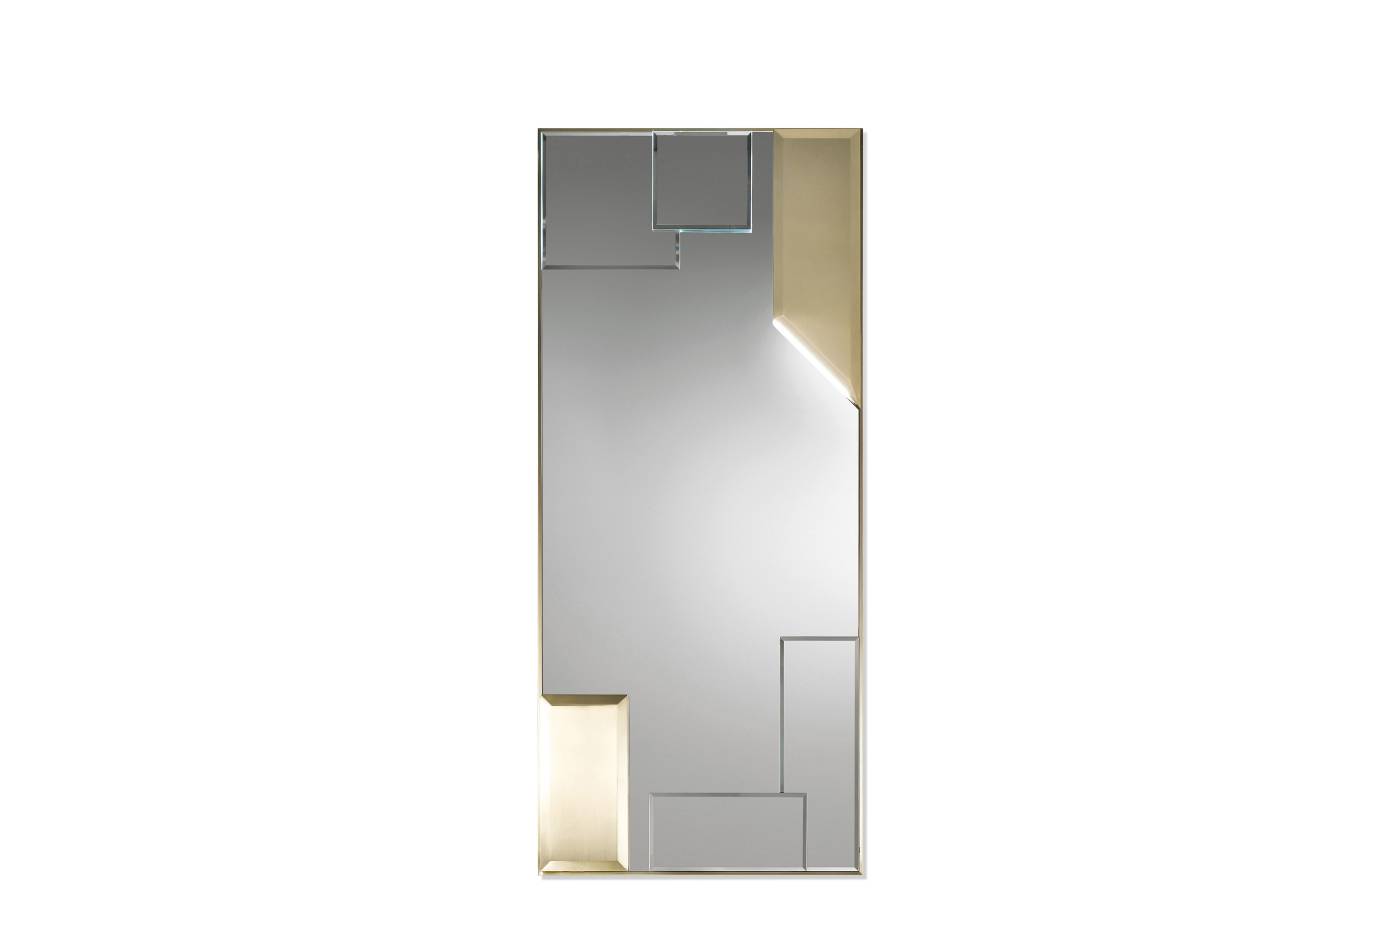 DÉCO mirror - convey elegance to each space with italian classic MIRRORS of the classic Oro Bianco collection